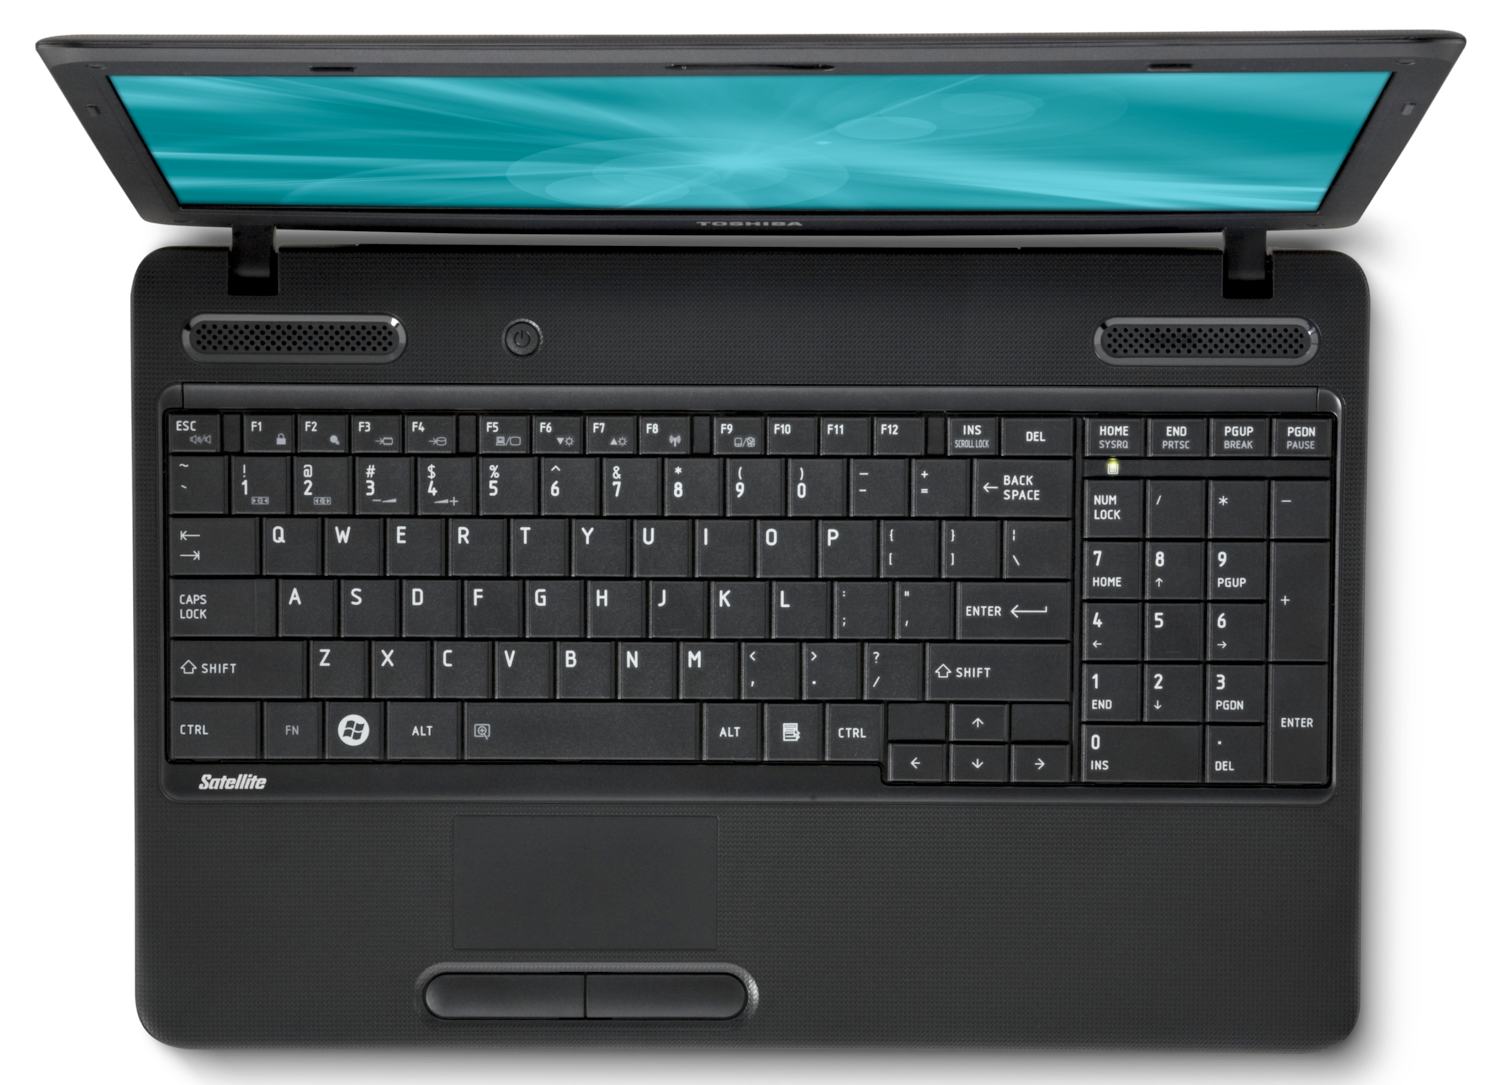 http://thetechjournal.com/wp-content/uploads/images/1110/1319098195-toshiba-satellite-c655ds5336-156inch-laptop-3.jpg